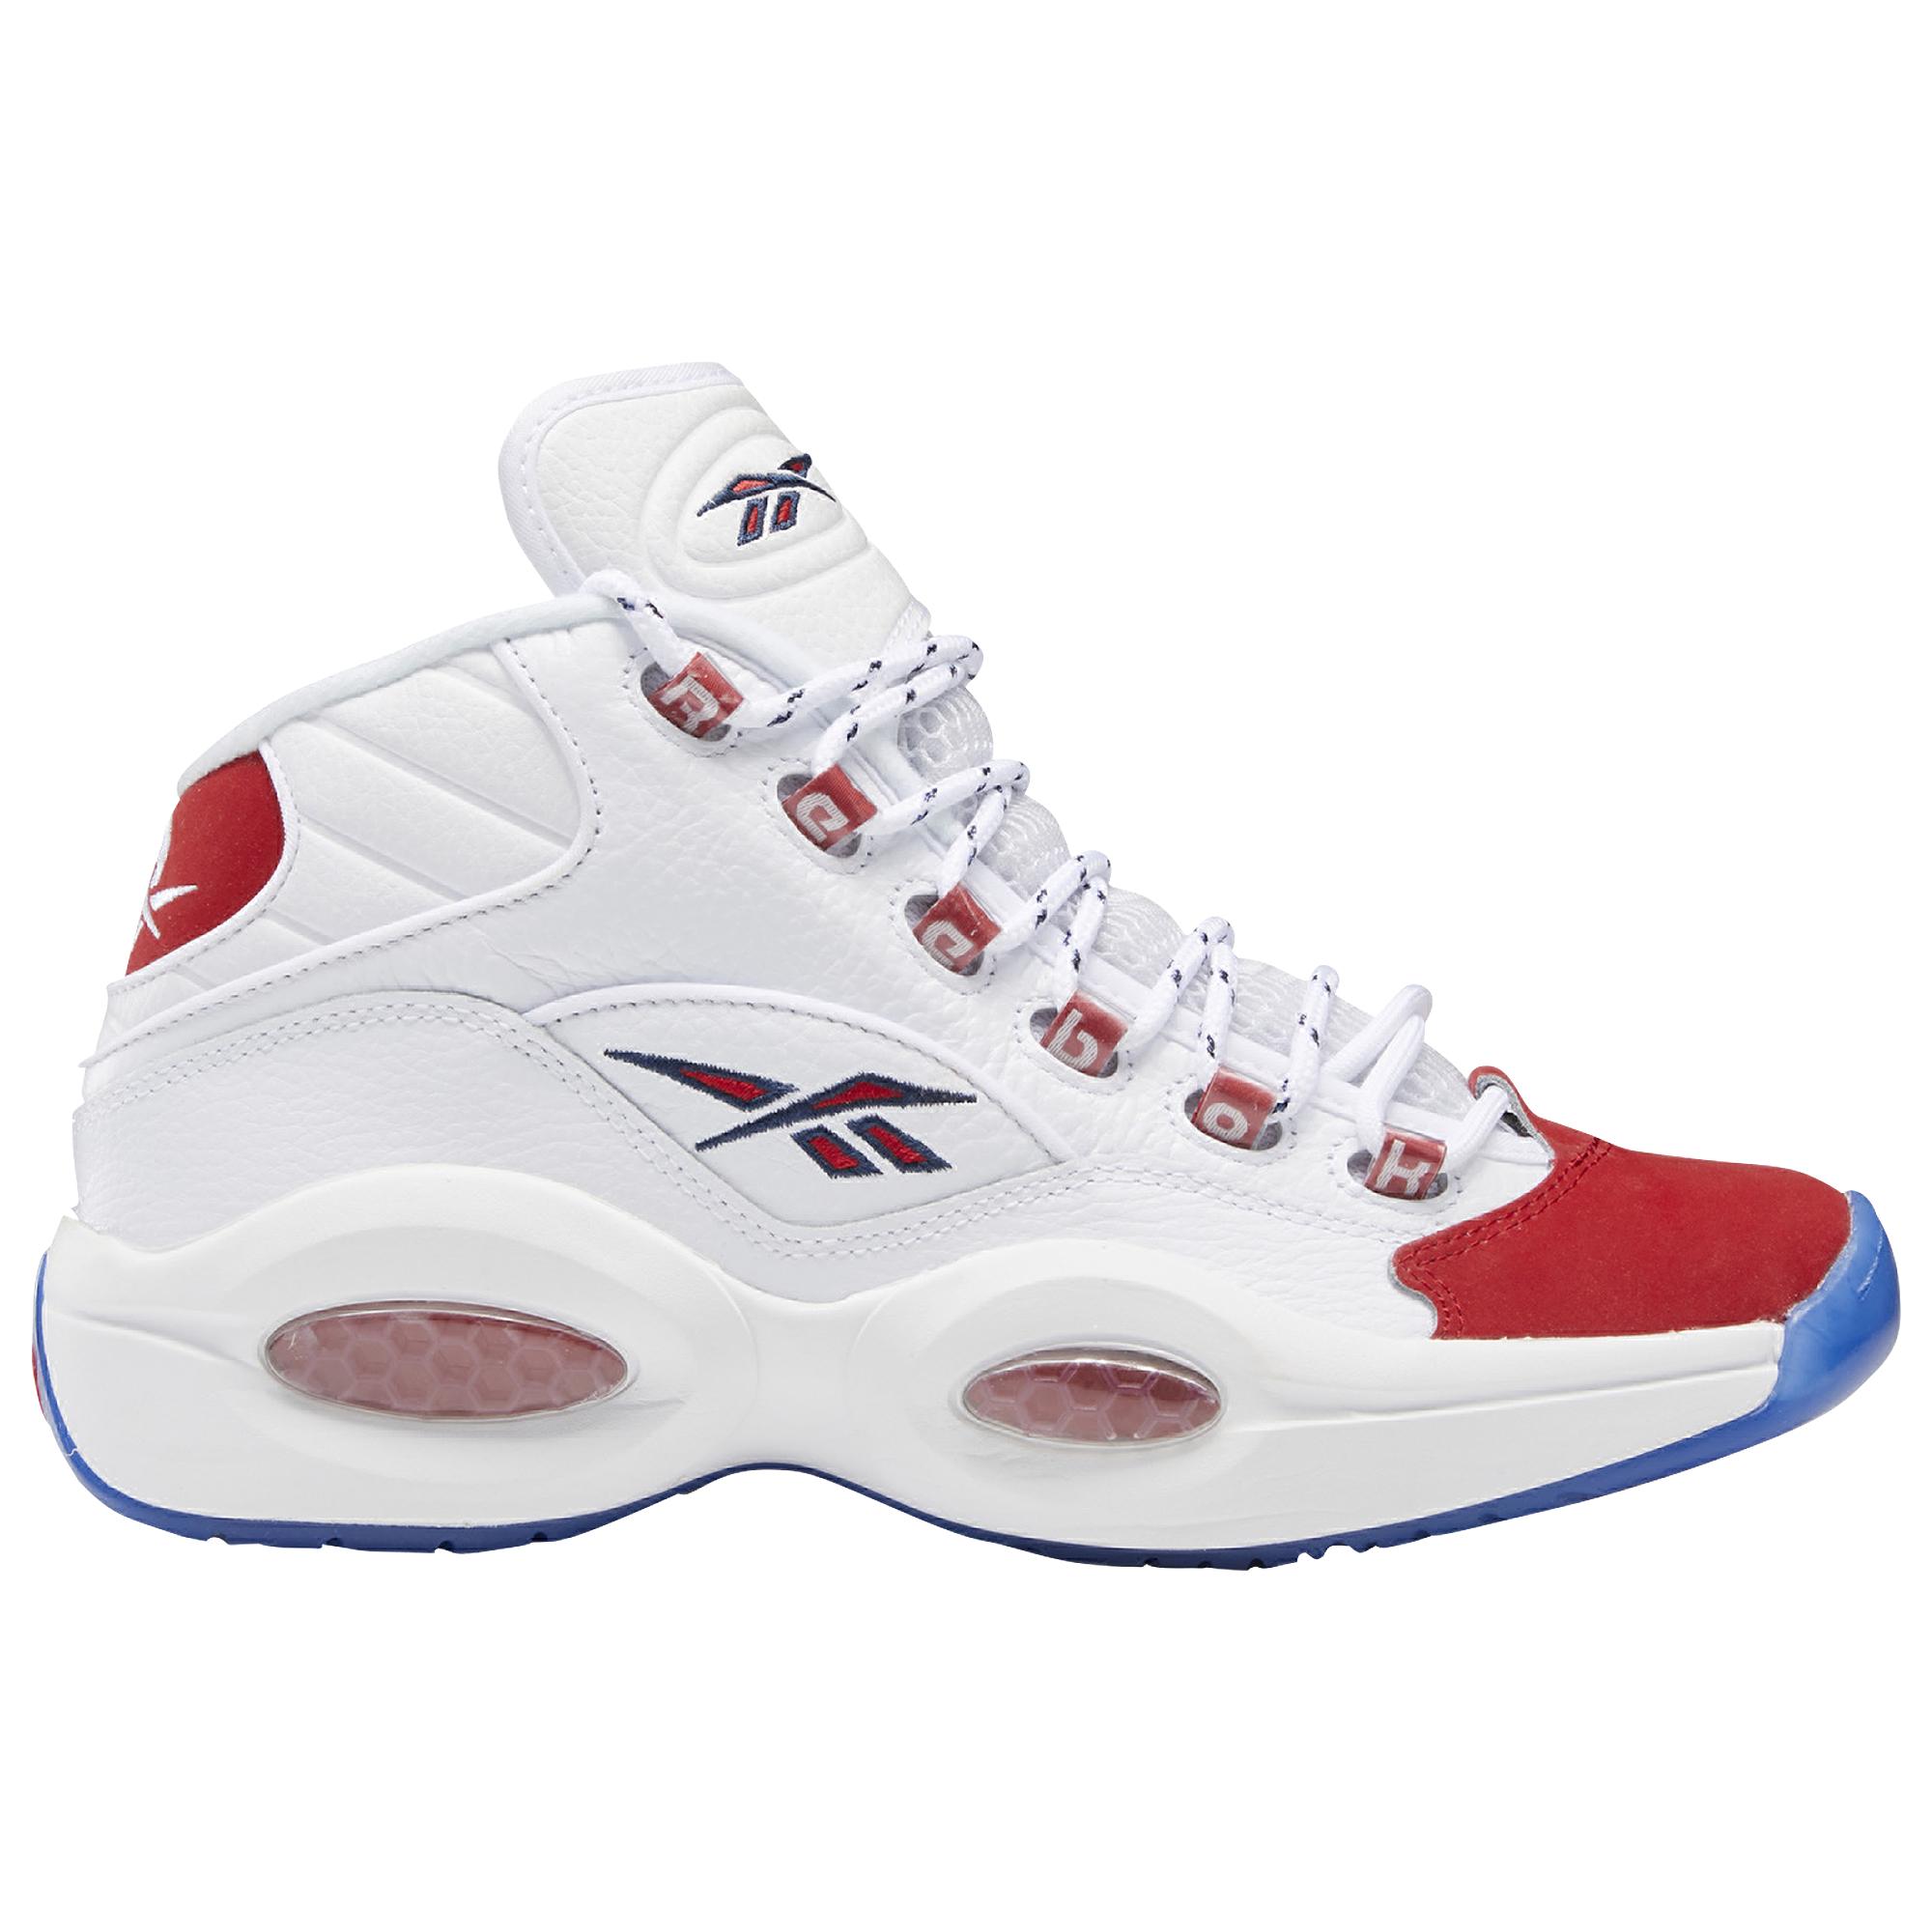 Reebok Leather Question Mid - Basketball Shoes in White for Men - Lyst